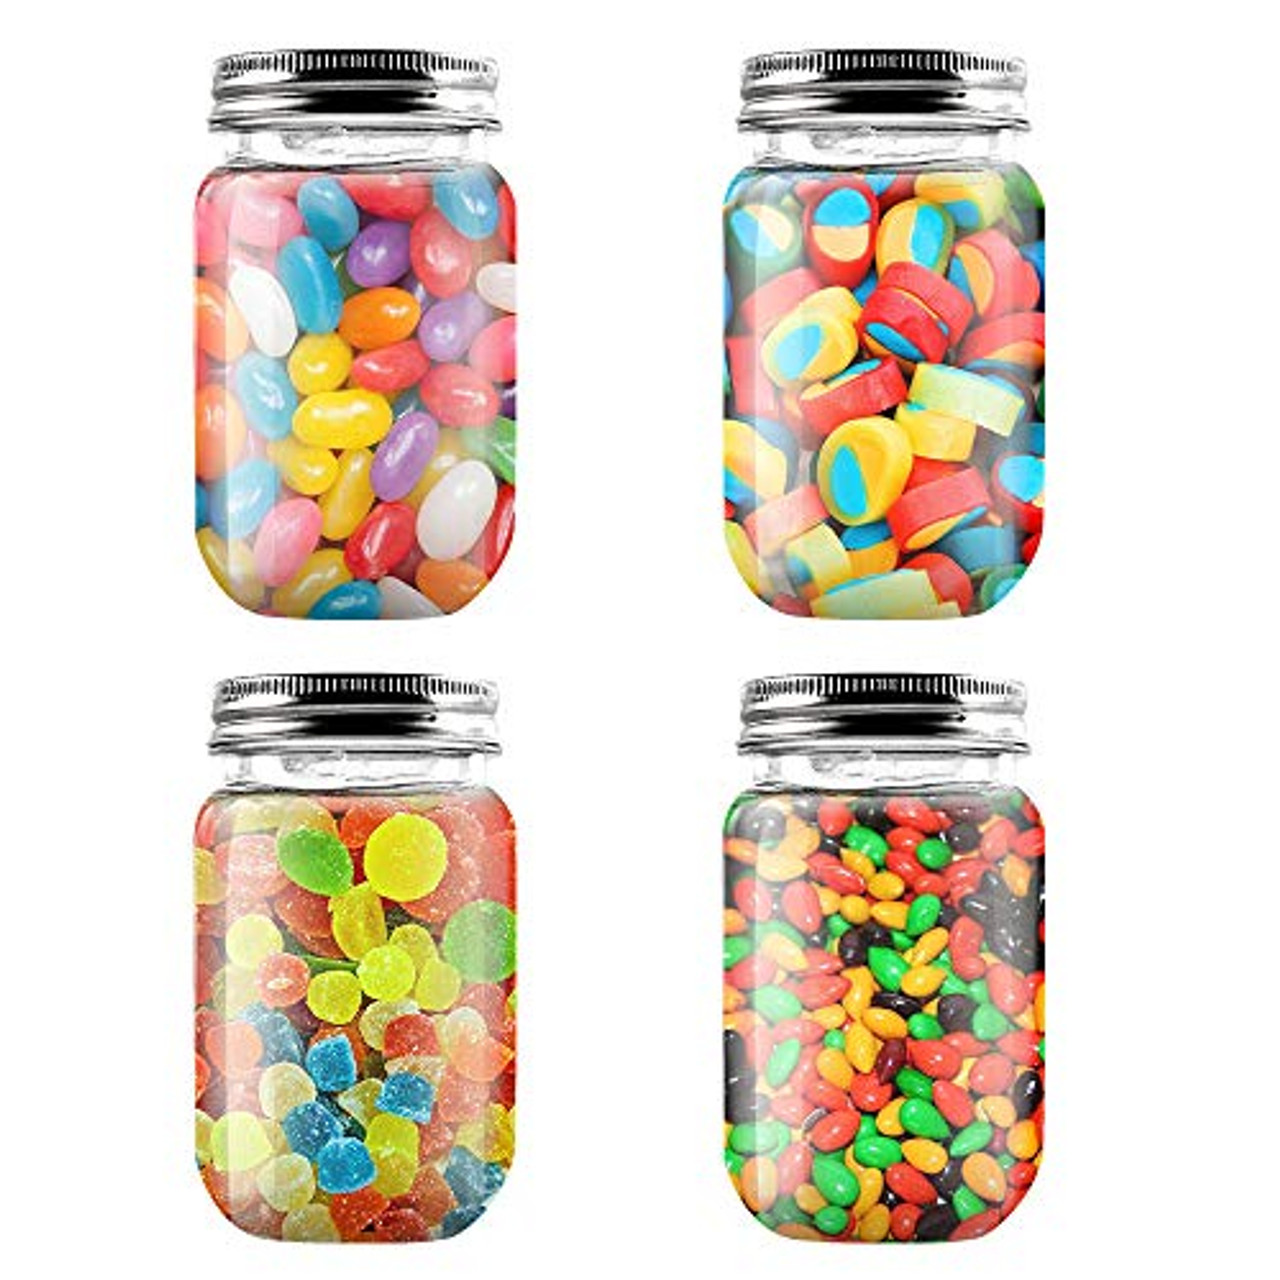 Plastic Jars with Lids, Set of 9, 27 Oz and 6 Oz Storage Containers,  Leakproof Slime Containers for Peanut, Spice, Cookie, Candy and Dry Food